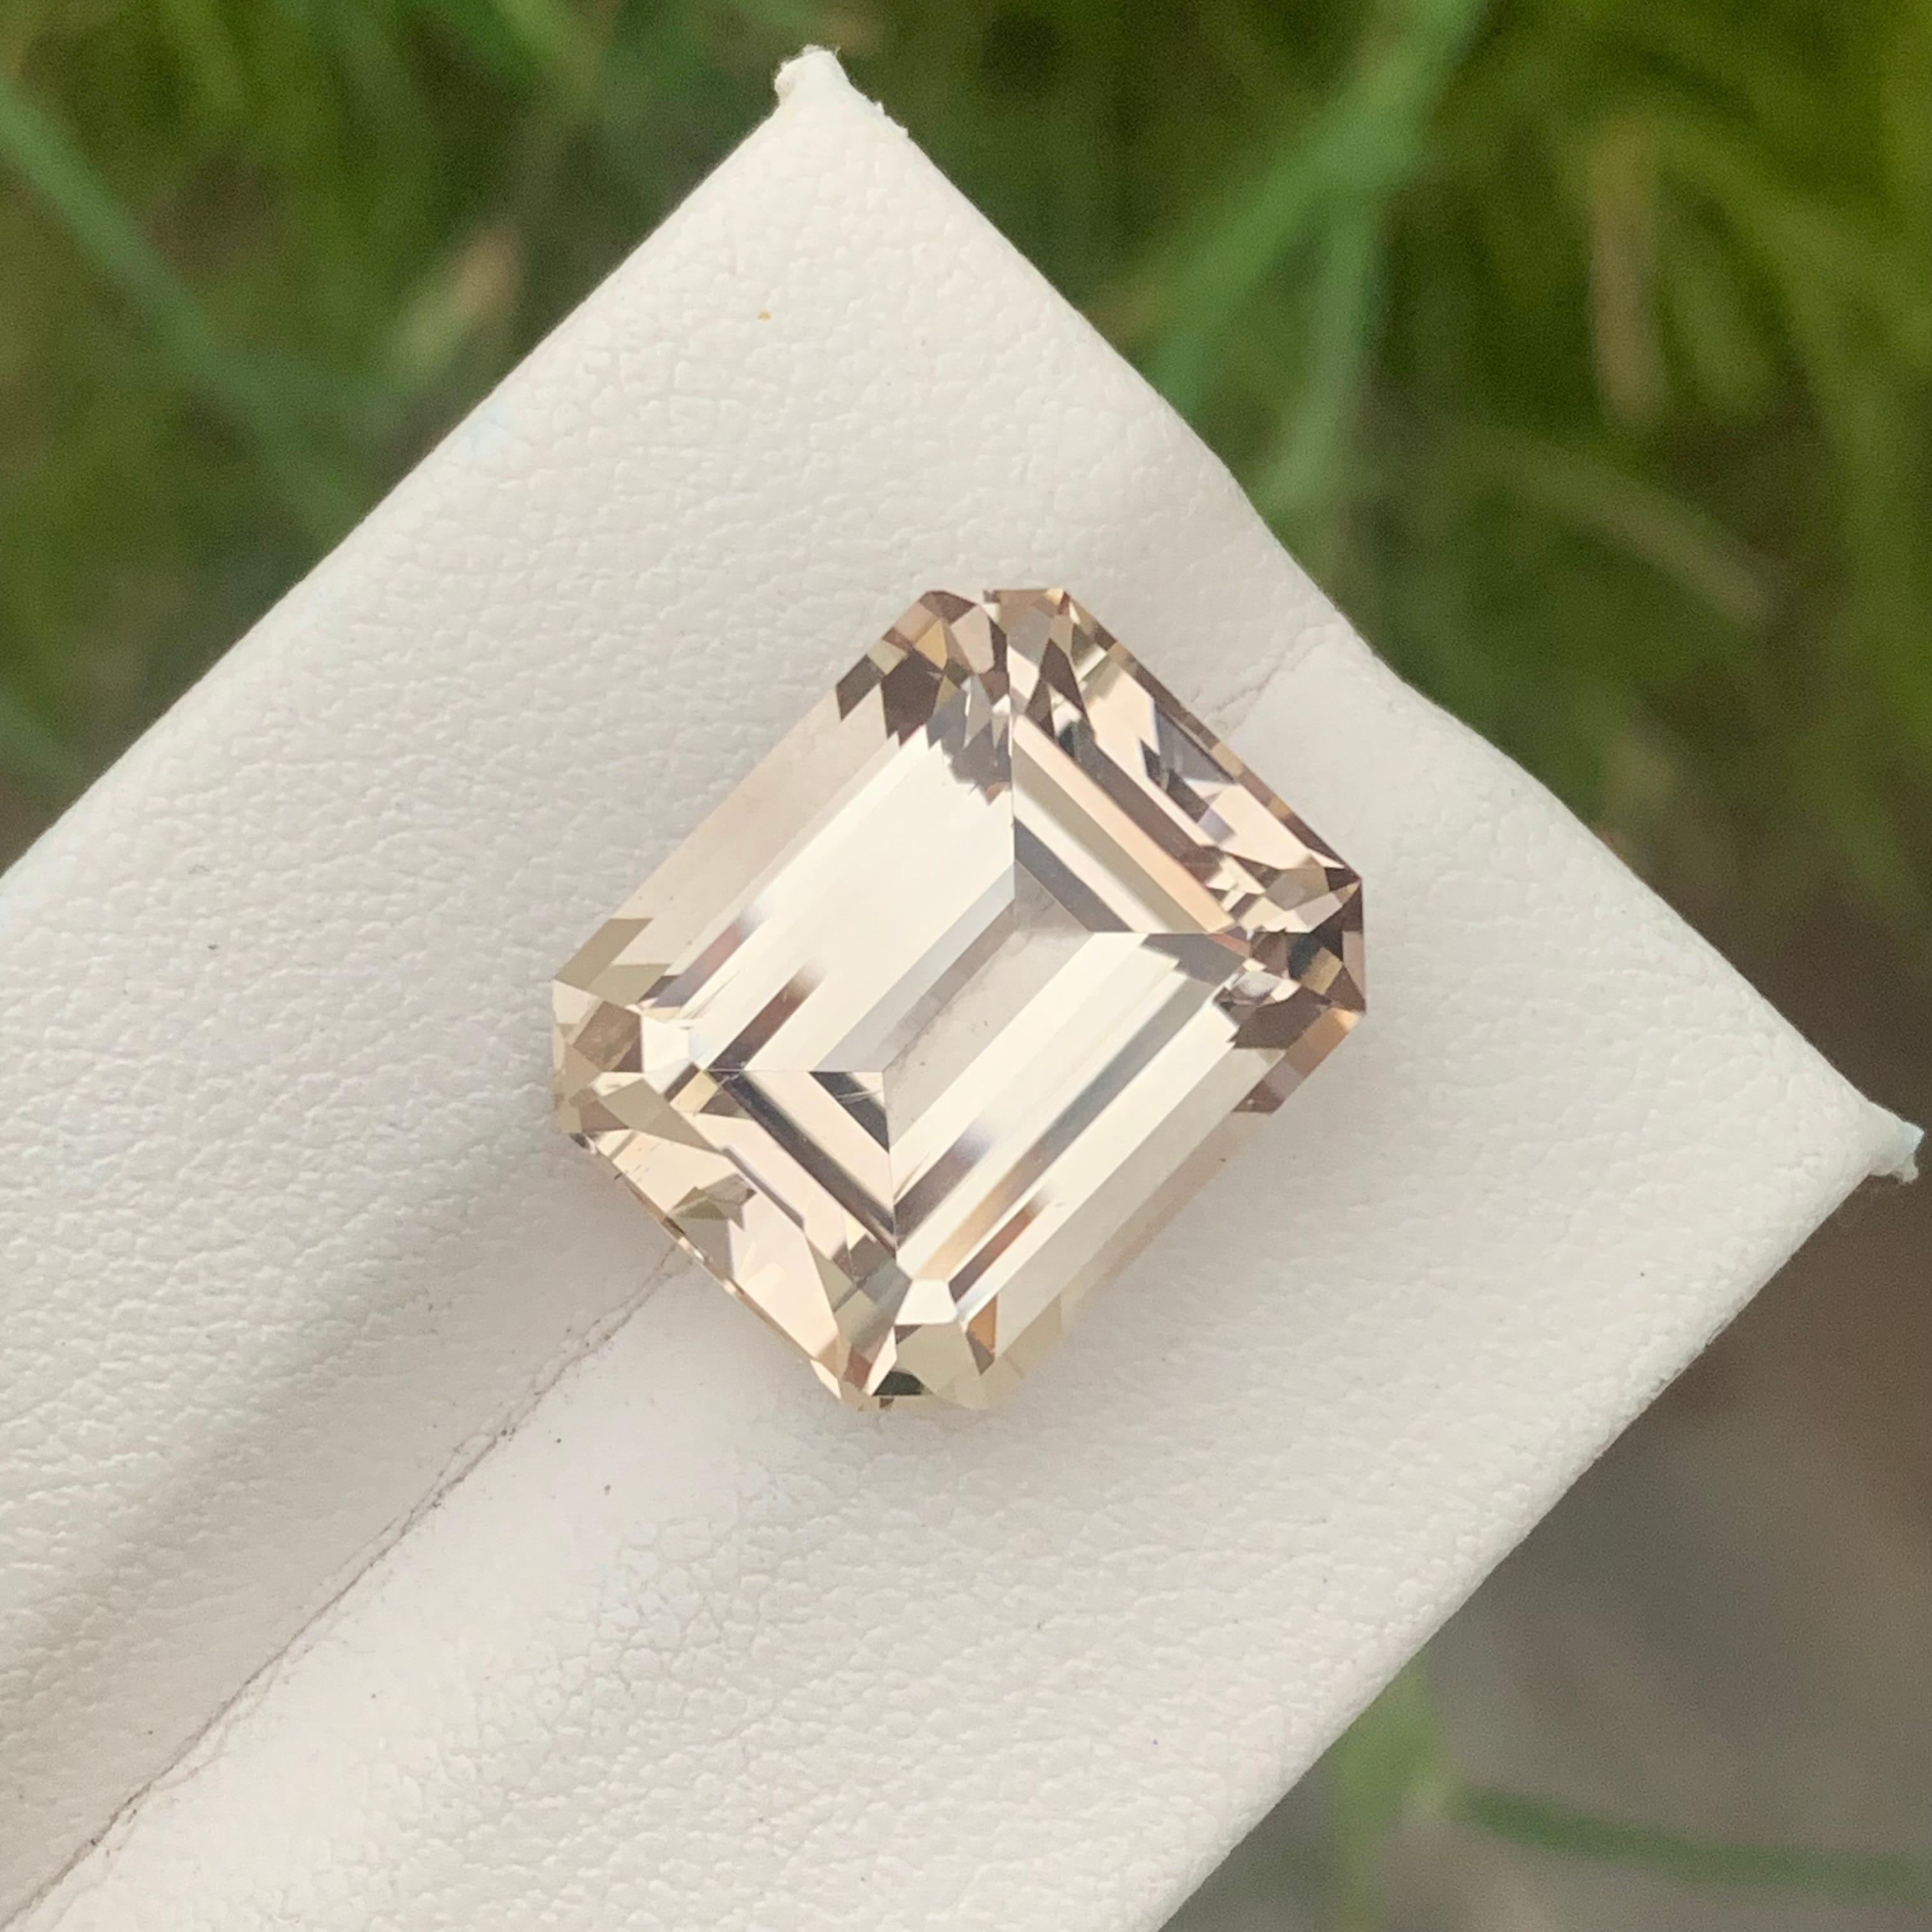 Gemstone Type : Topaz
Weight : 17.40 Carats
Dimensions: 15.5x12.9x9.3 mm
Clarity : Clean
Origin : Skardu
Color: Golden
Shape: Emerald
Cut: Asscher
Certificate: On Demand
Month: November
November Birthstone. Those with November birthdays have two